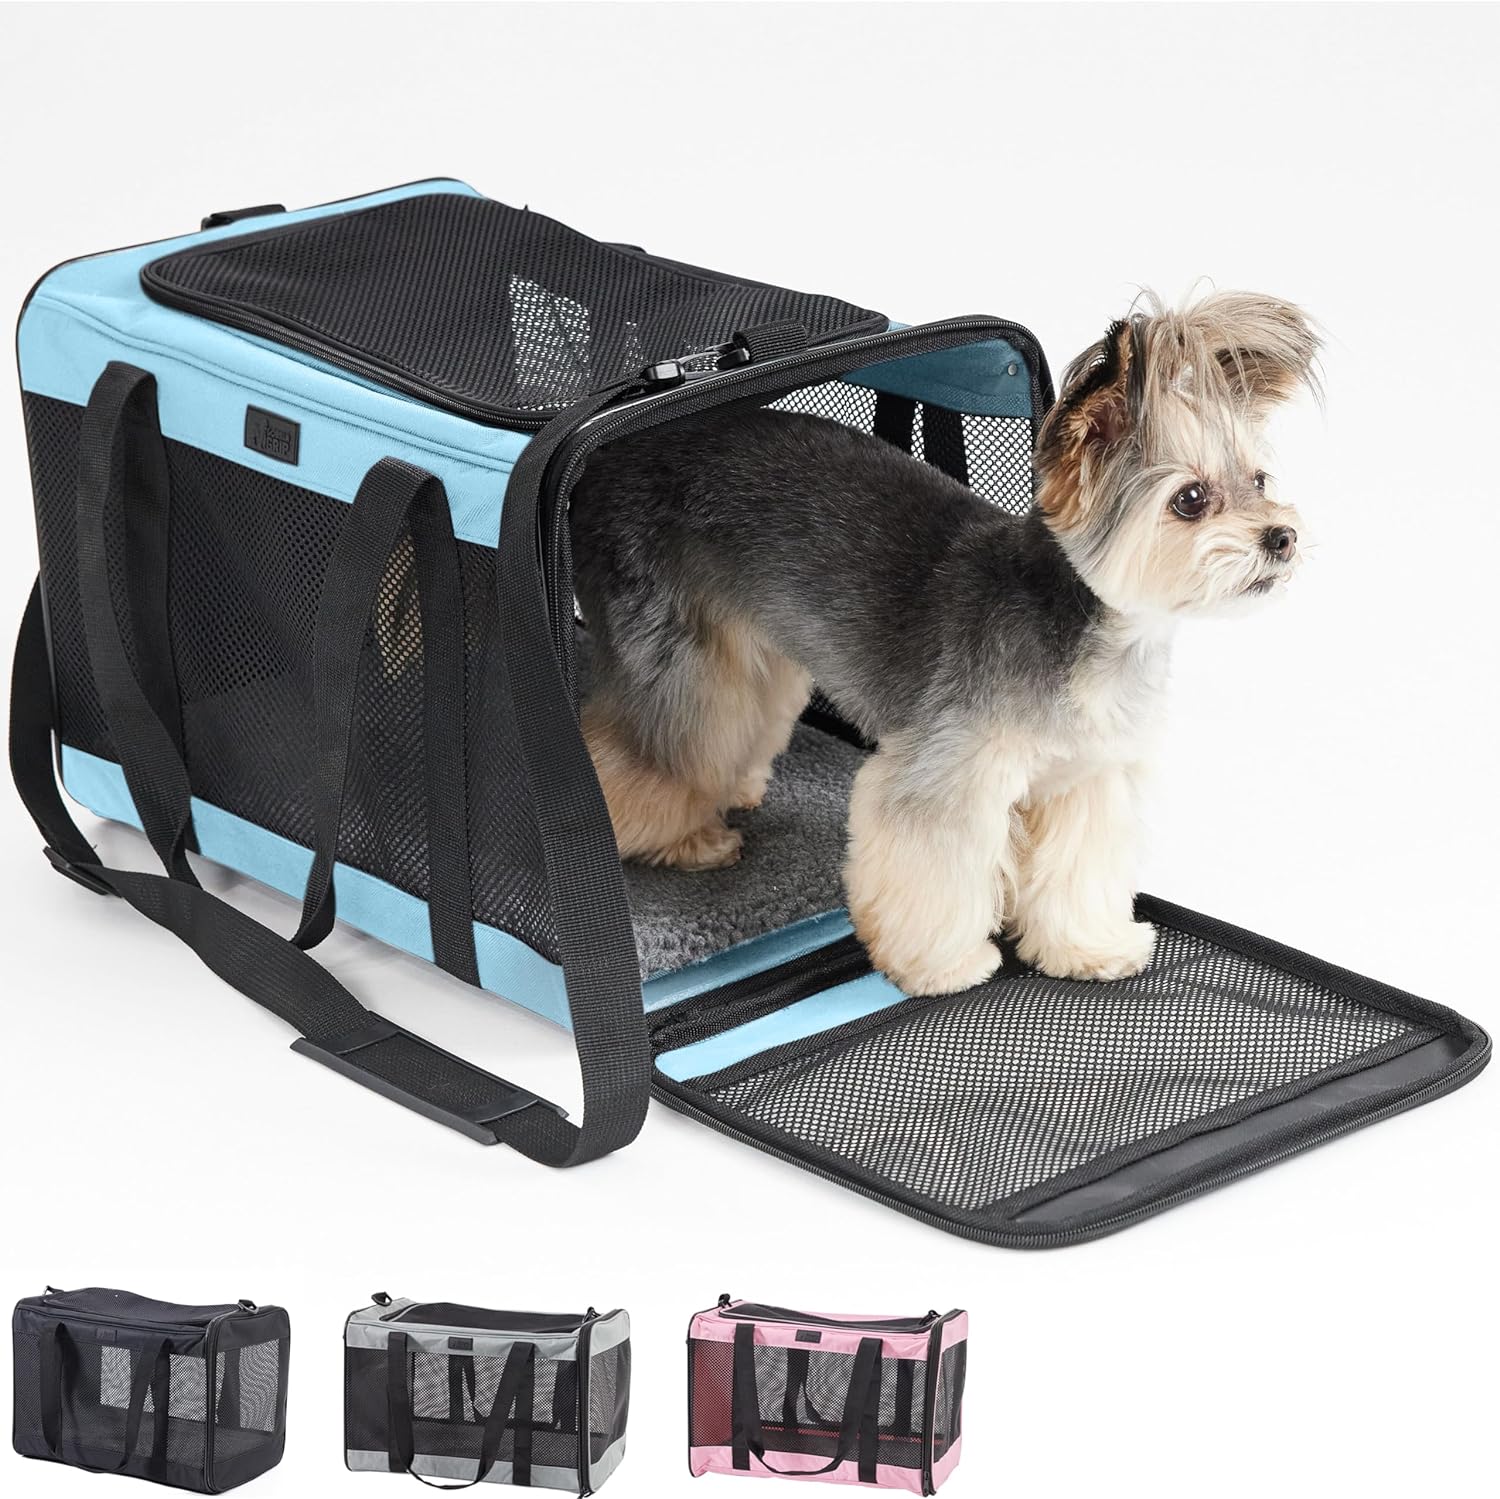 Gorilla Grip Soft Travel Dog Cat Carrier Up to 25 LBS